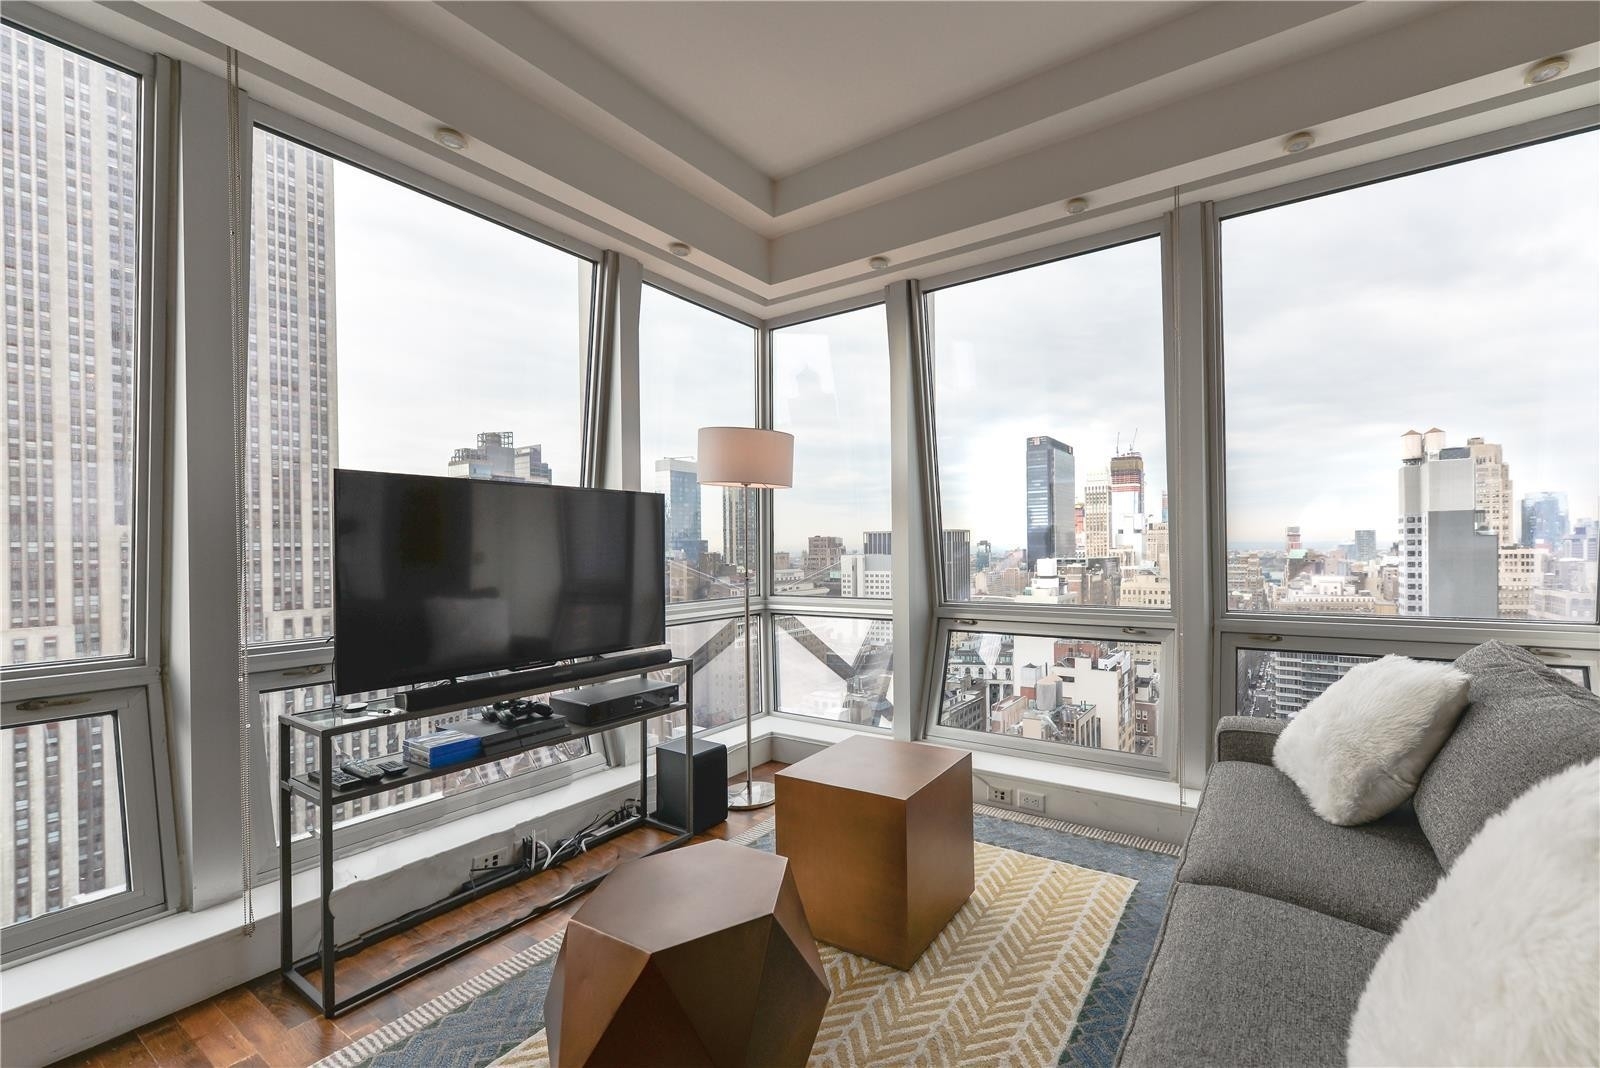 4. Rentals at Residences-Langham, 400 FIFTH AVE, 47H Midtown West, New York, New York 10018